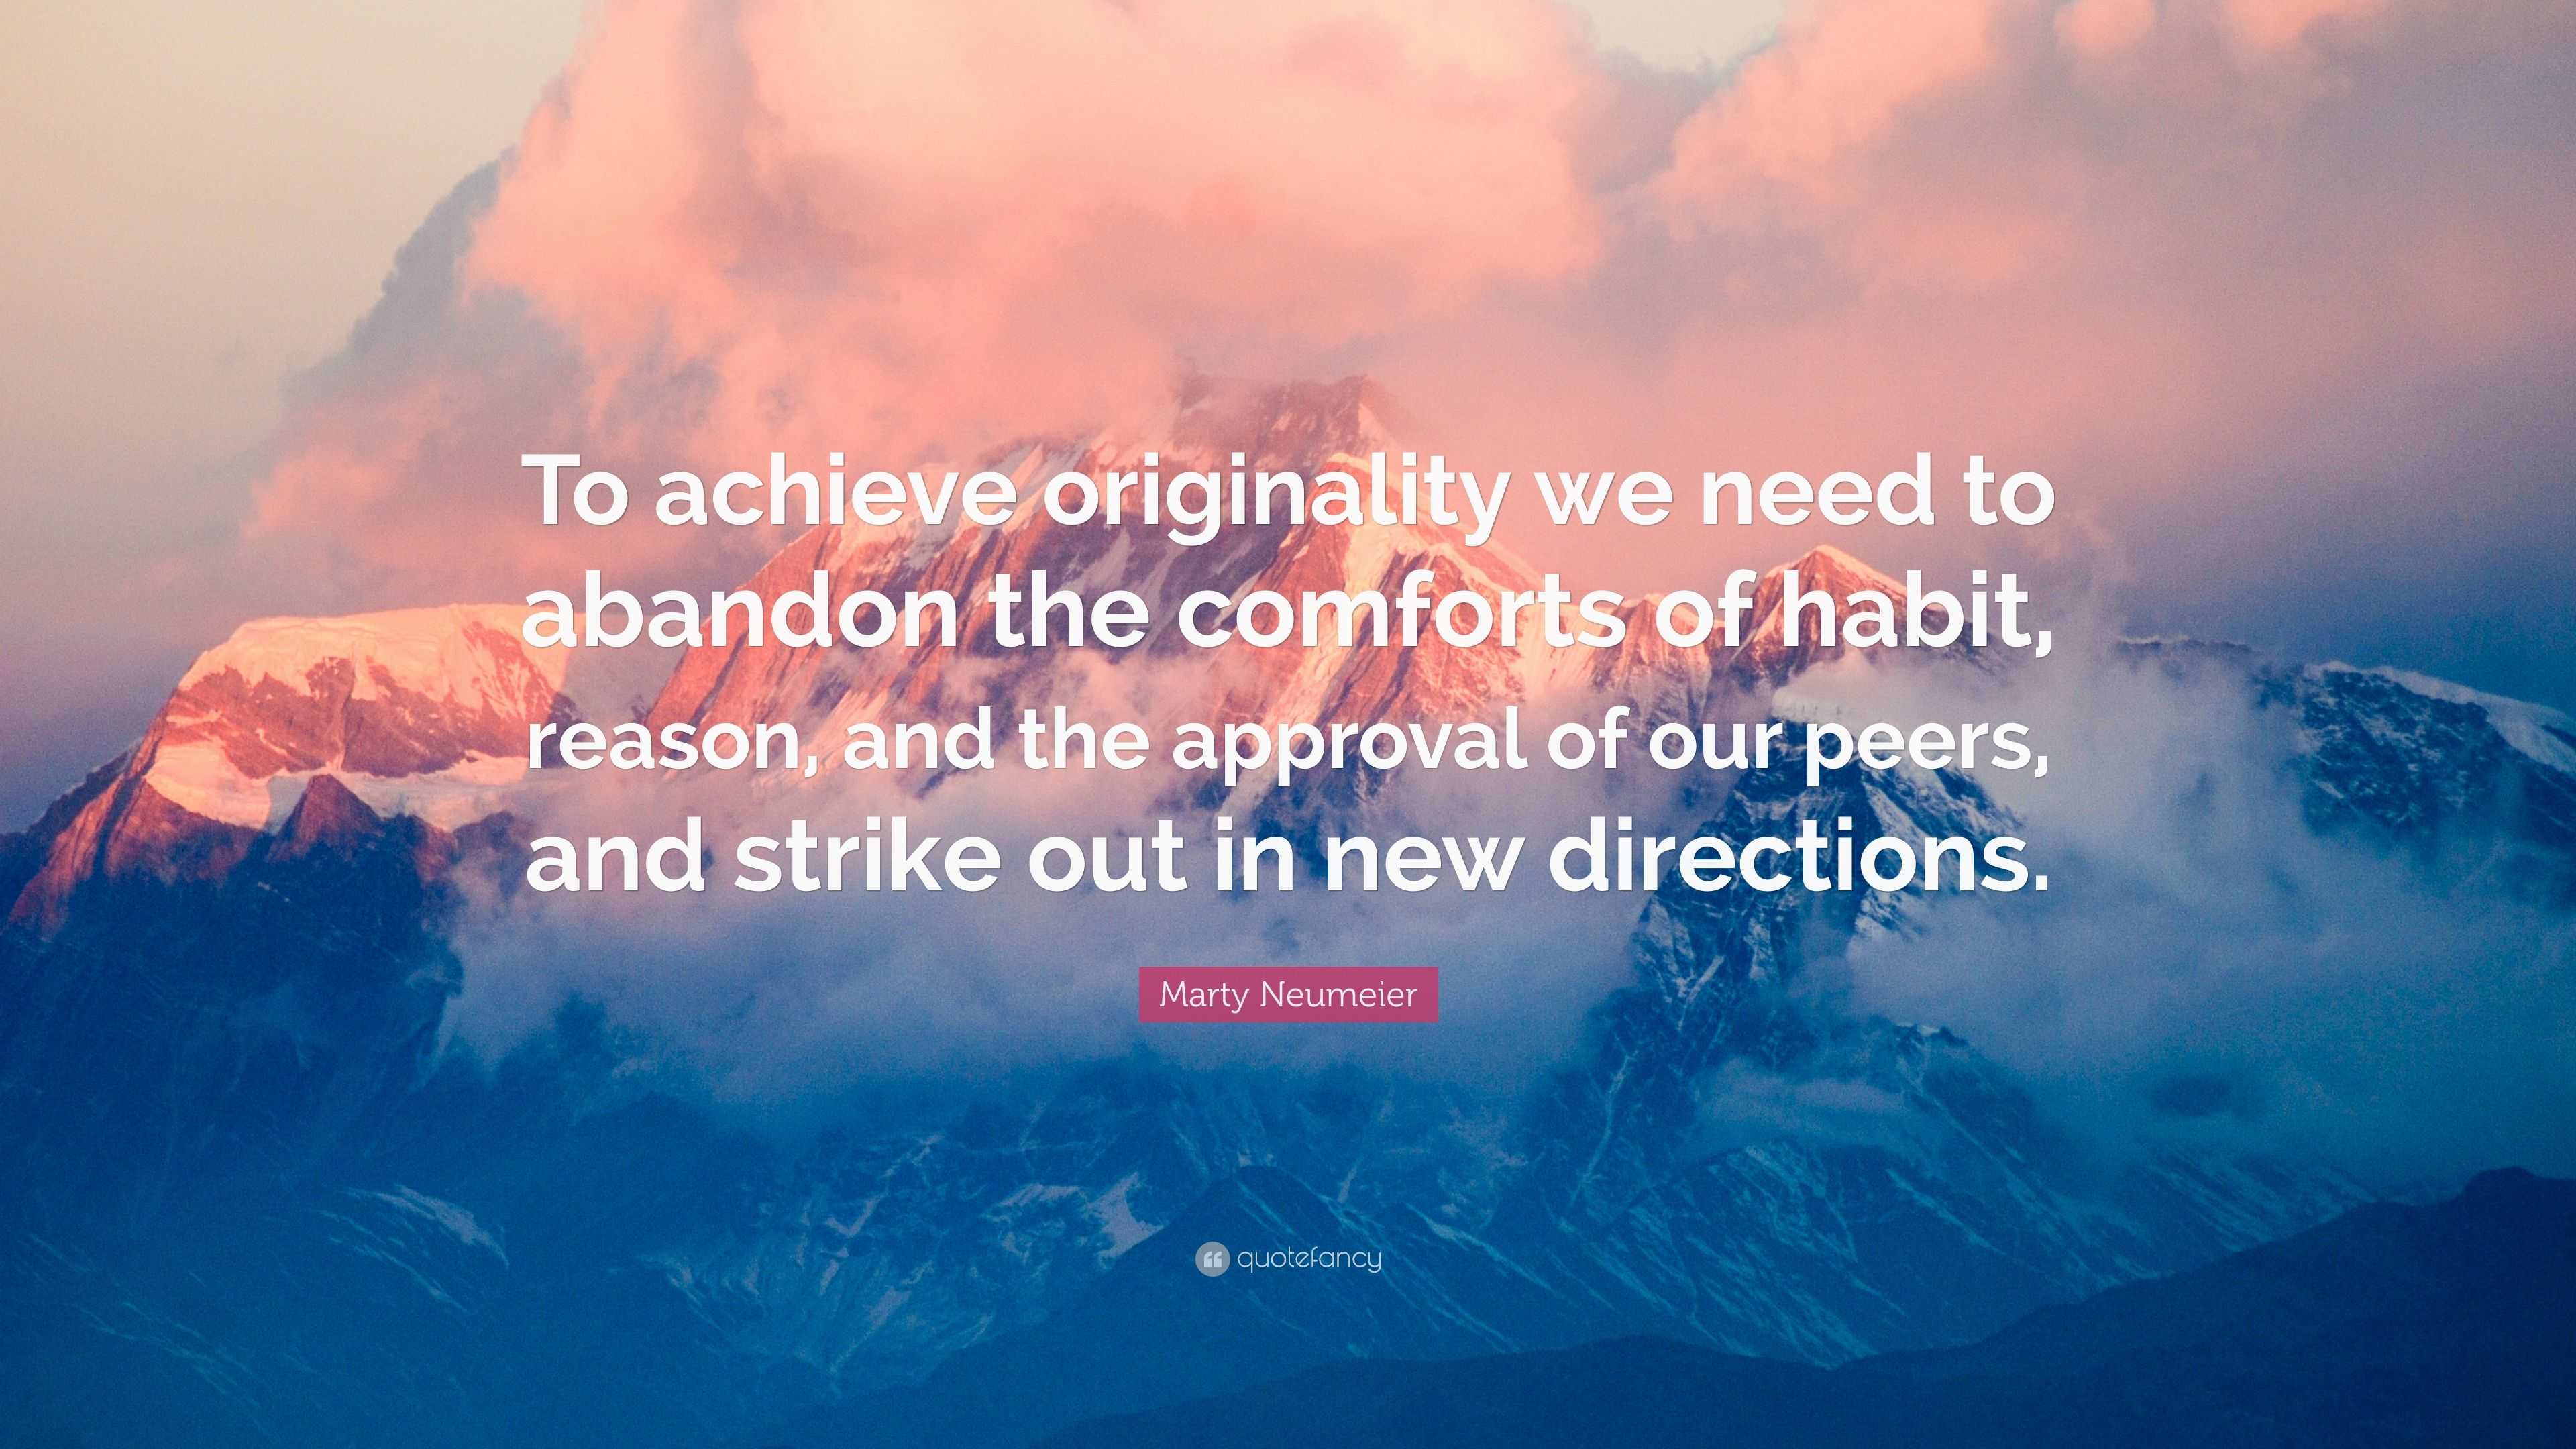 Marty Neumeier Quote: “To achieve originality we need to abandon the ...